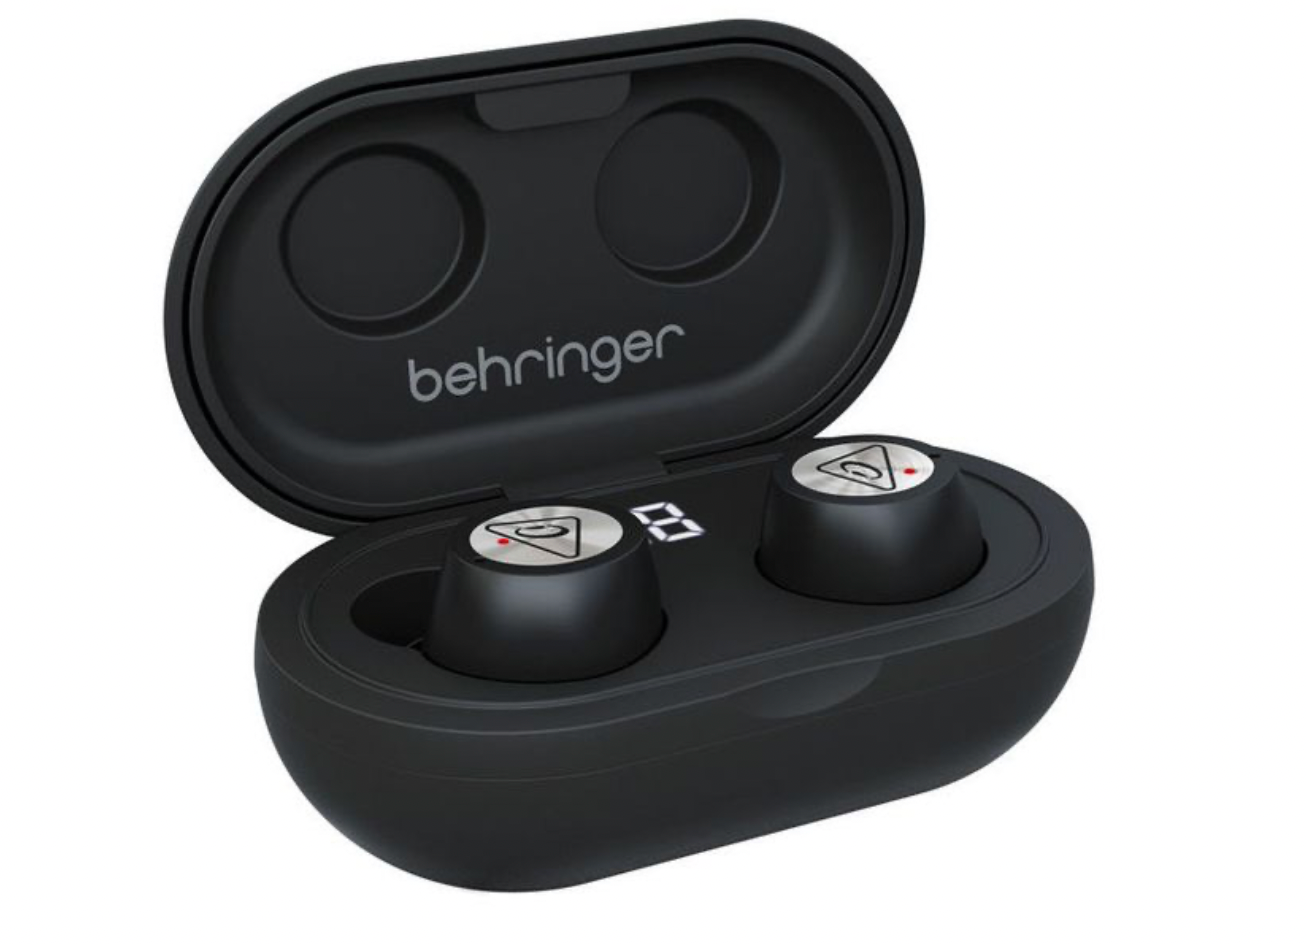 BEHRINGER TRUE BUDS - AUDIOPHILE WIRELESS EARPHONES WITH BLUETOOTH TRUE WIRELESS STEREO CONNECTIVITY